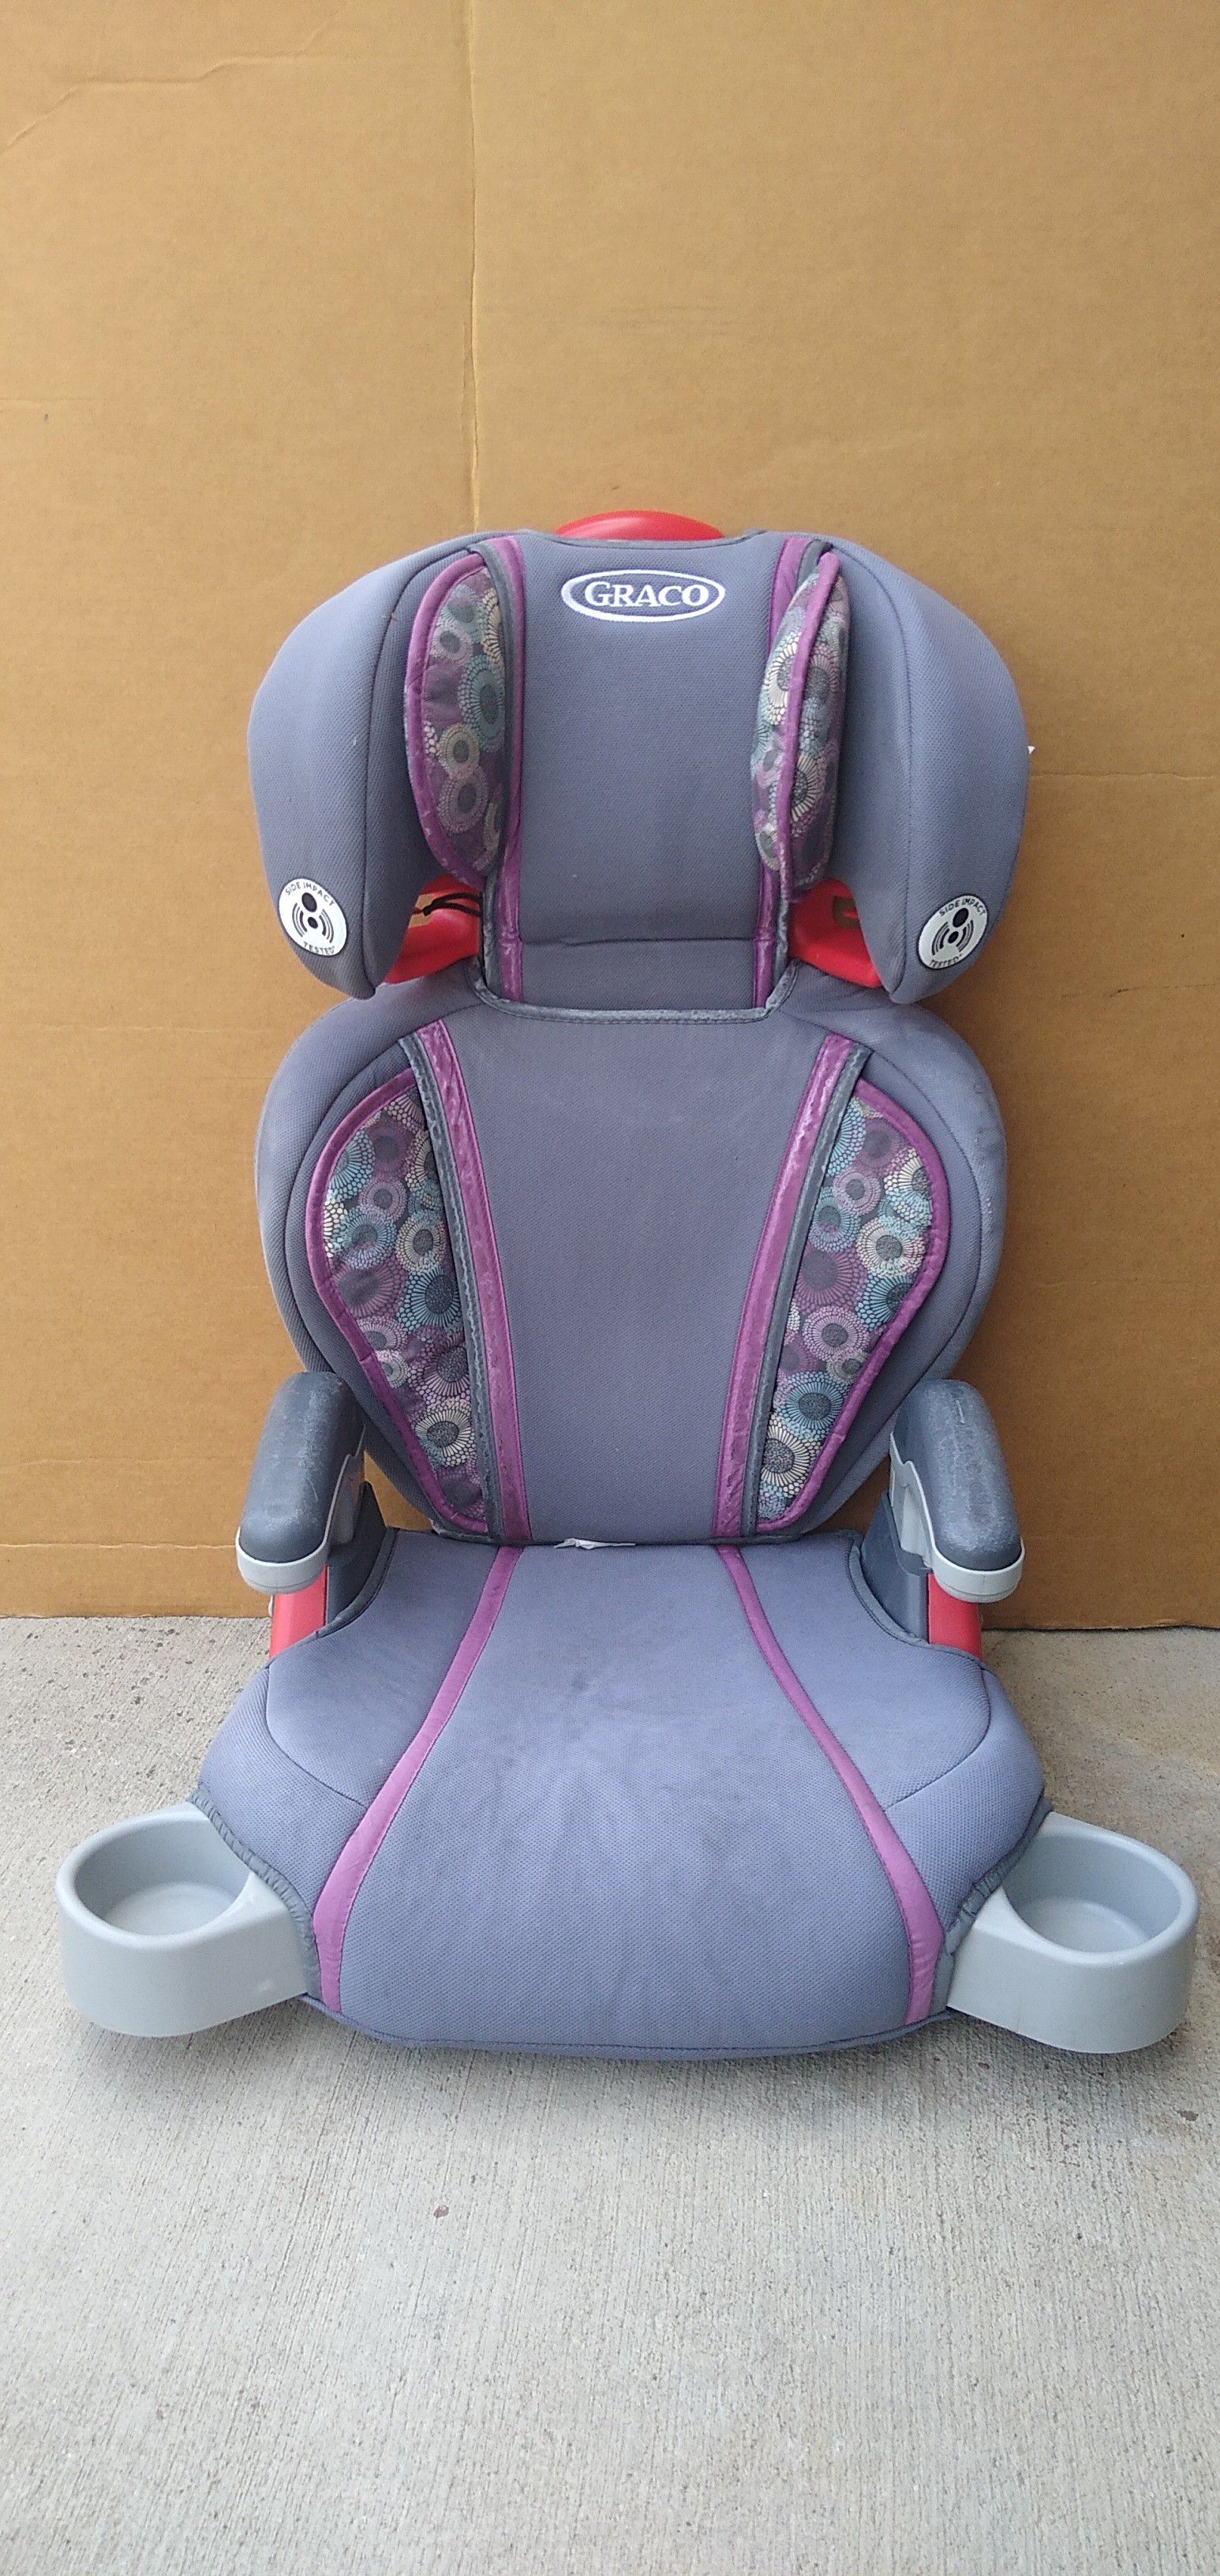 Booster car seat with back for kid